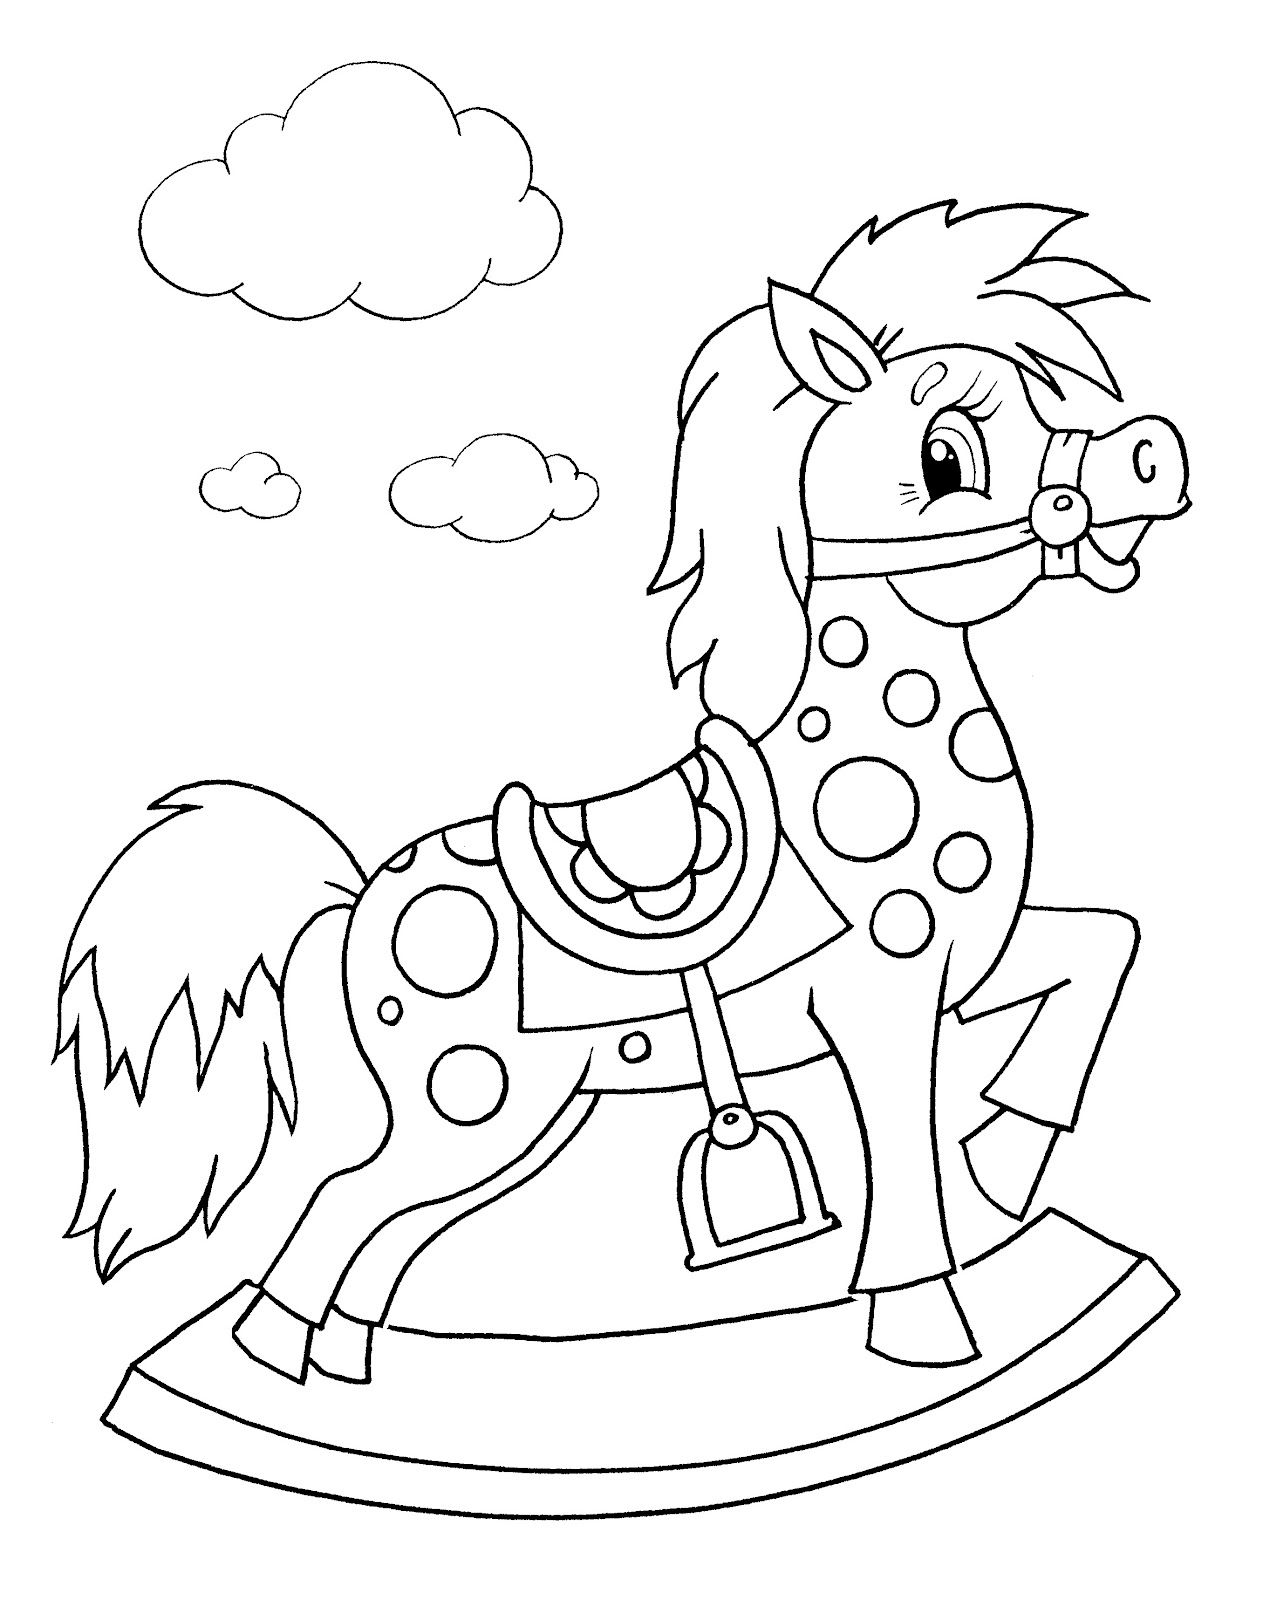 Major horse coloring book for kids